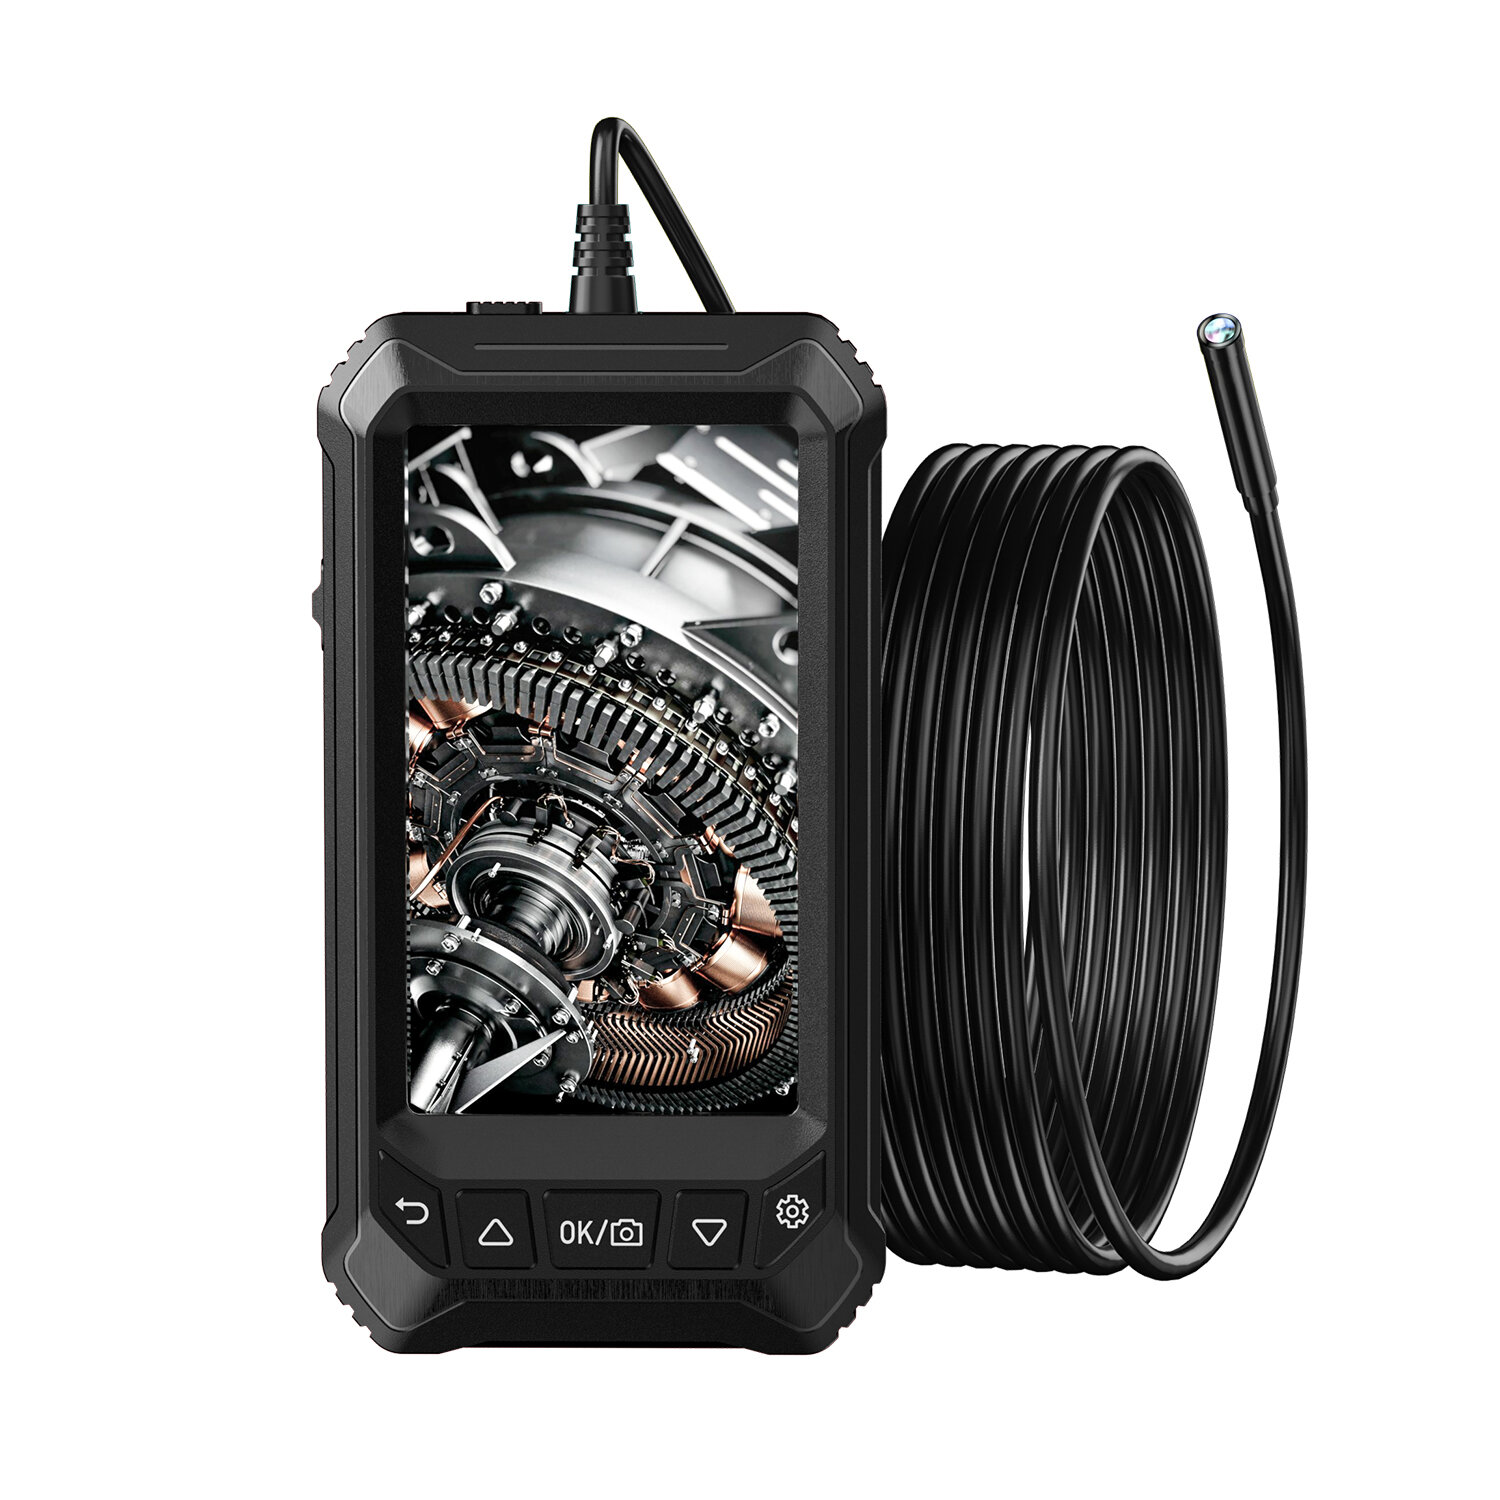 

INSKAM ALS5005 5M Borescope 2MP 8.0MM/5.5MM LCD Handheld Digital Inspection Endoscope with 5.0-Inch High-Definition IPS